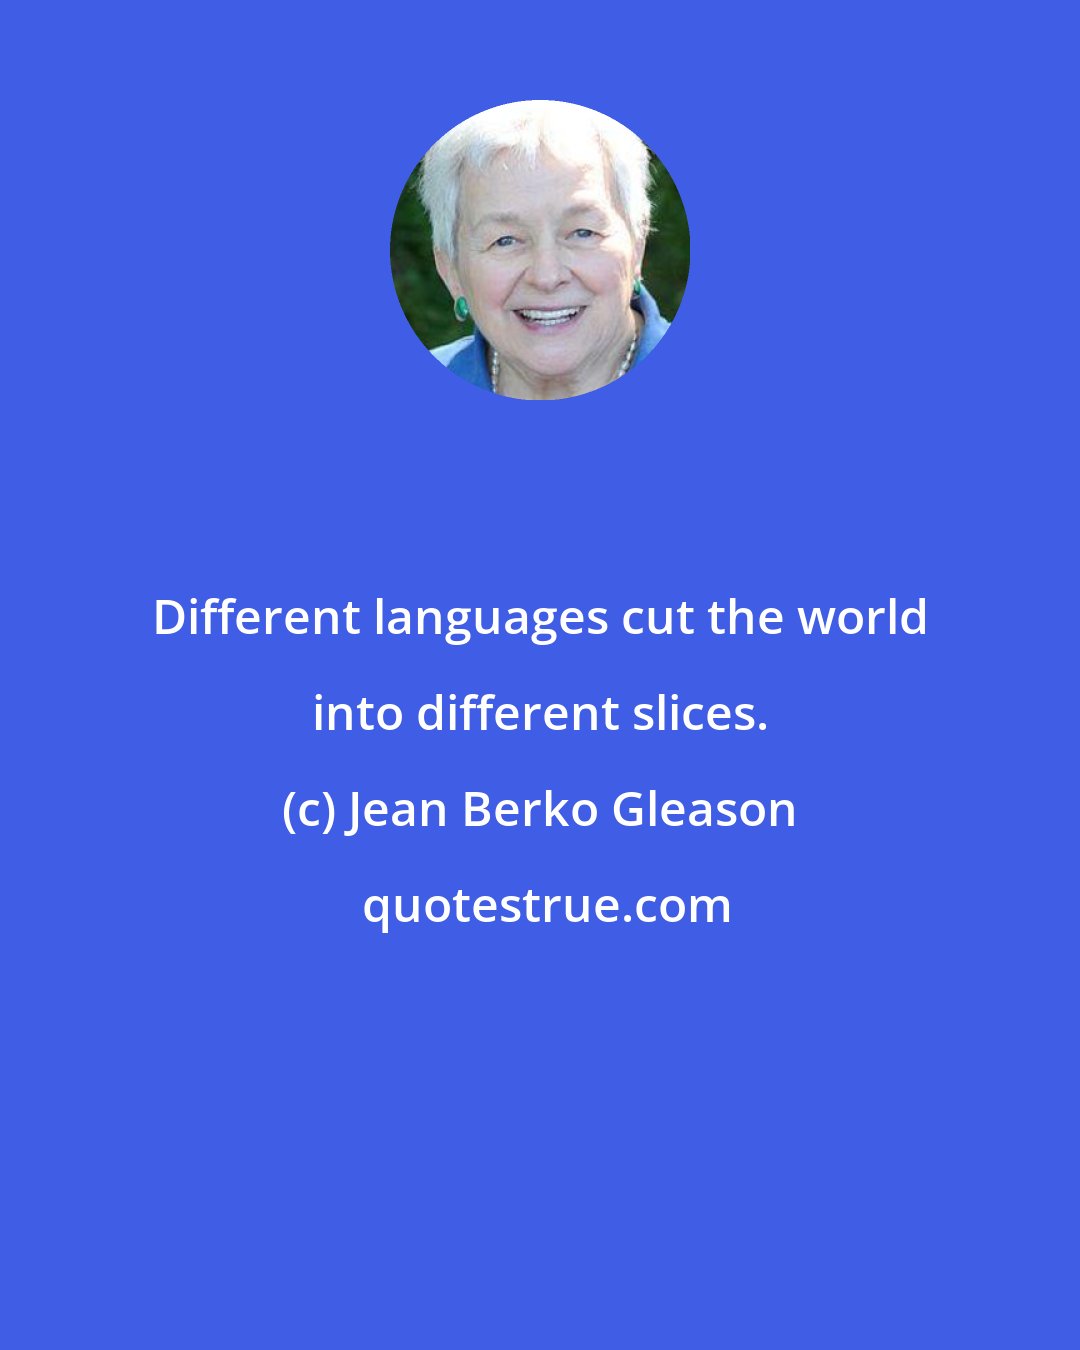 Jean Berko Gleason: Different languages cut the world into different slices.